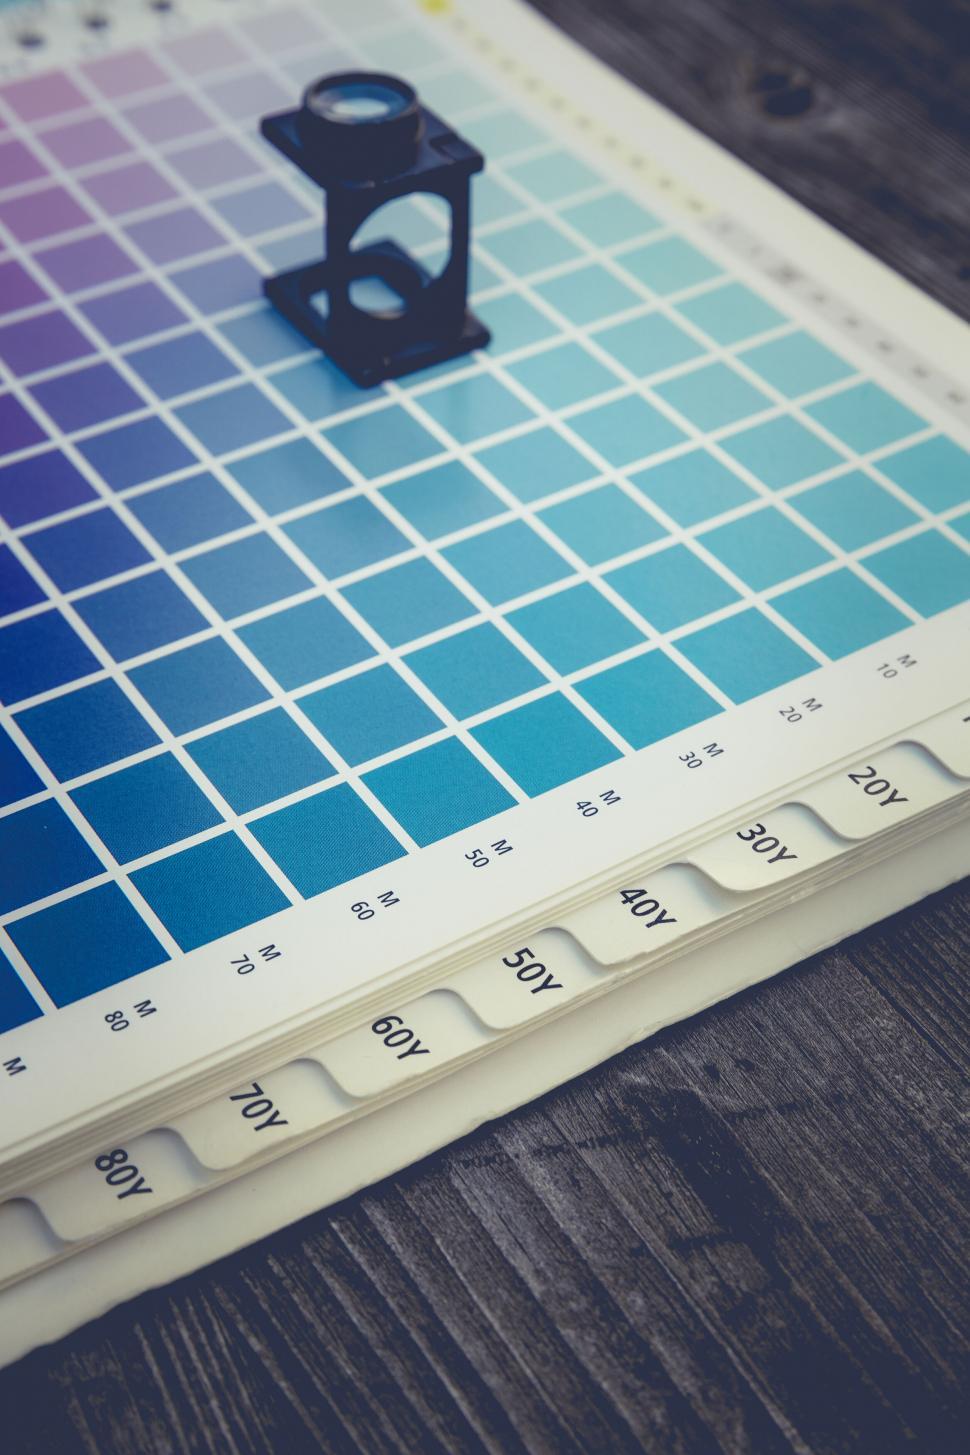 Free Image of Pantone color palette guide with lens 